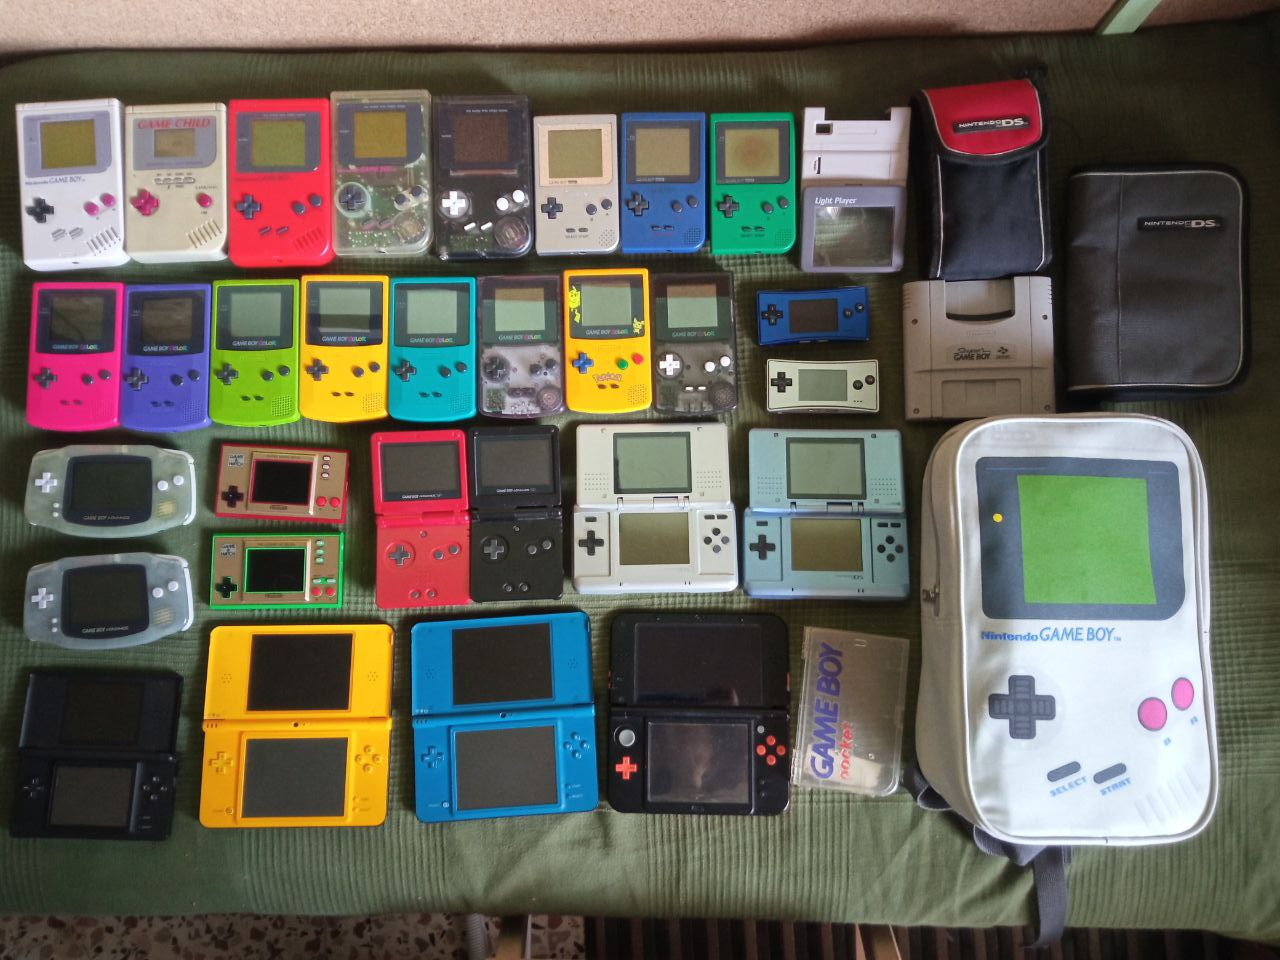 My DSI XL collection. Might be my favorite Nintendo handheld